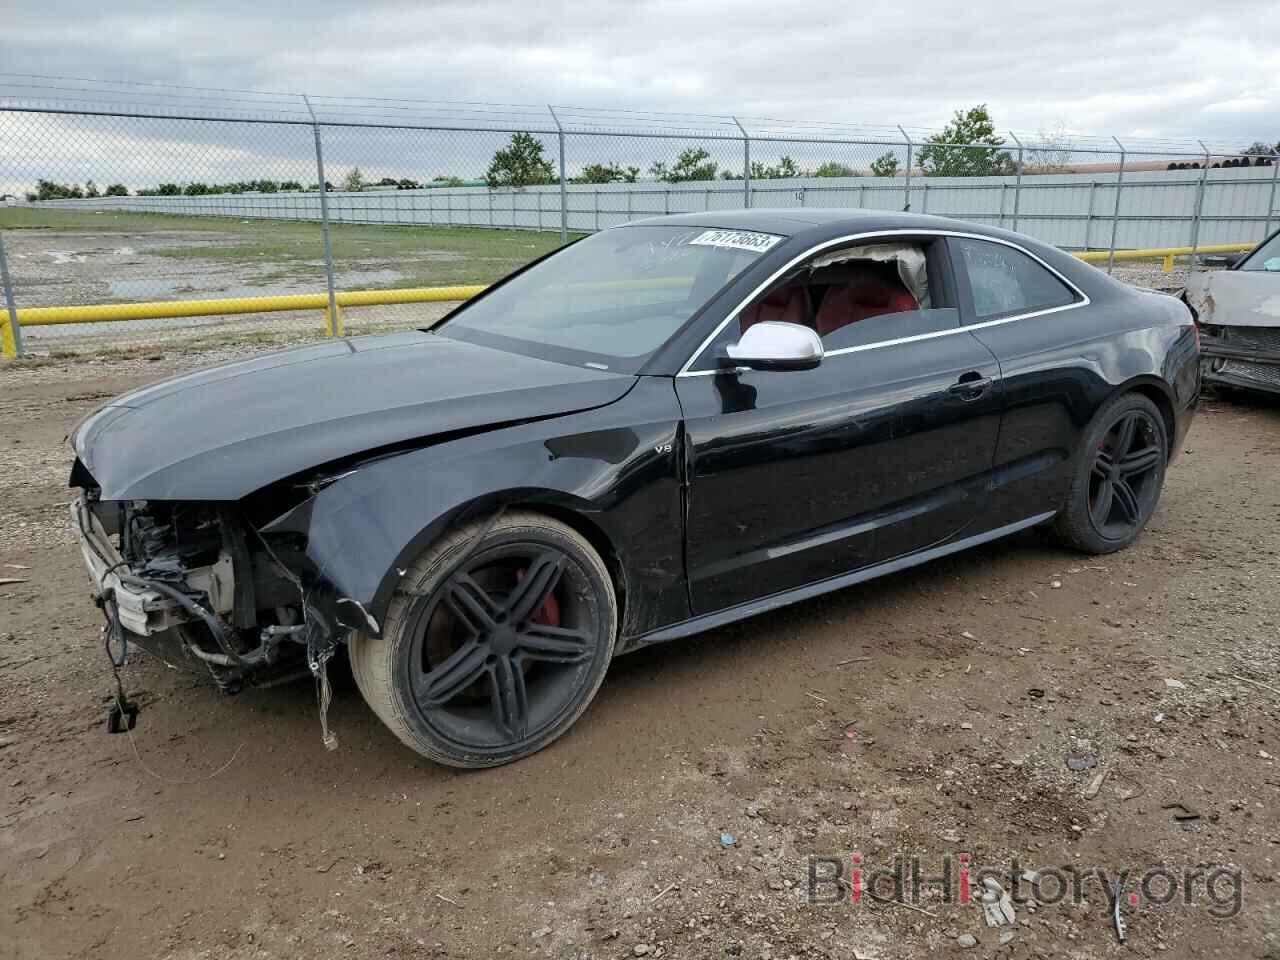 Photo WAUVVAFR7BA041223 - AUDI S5/RS5 2011